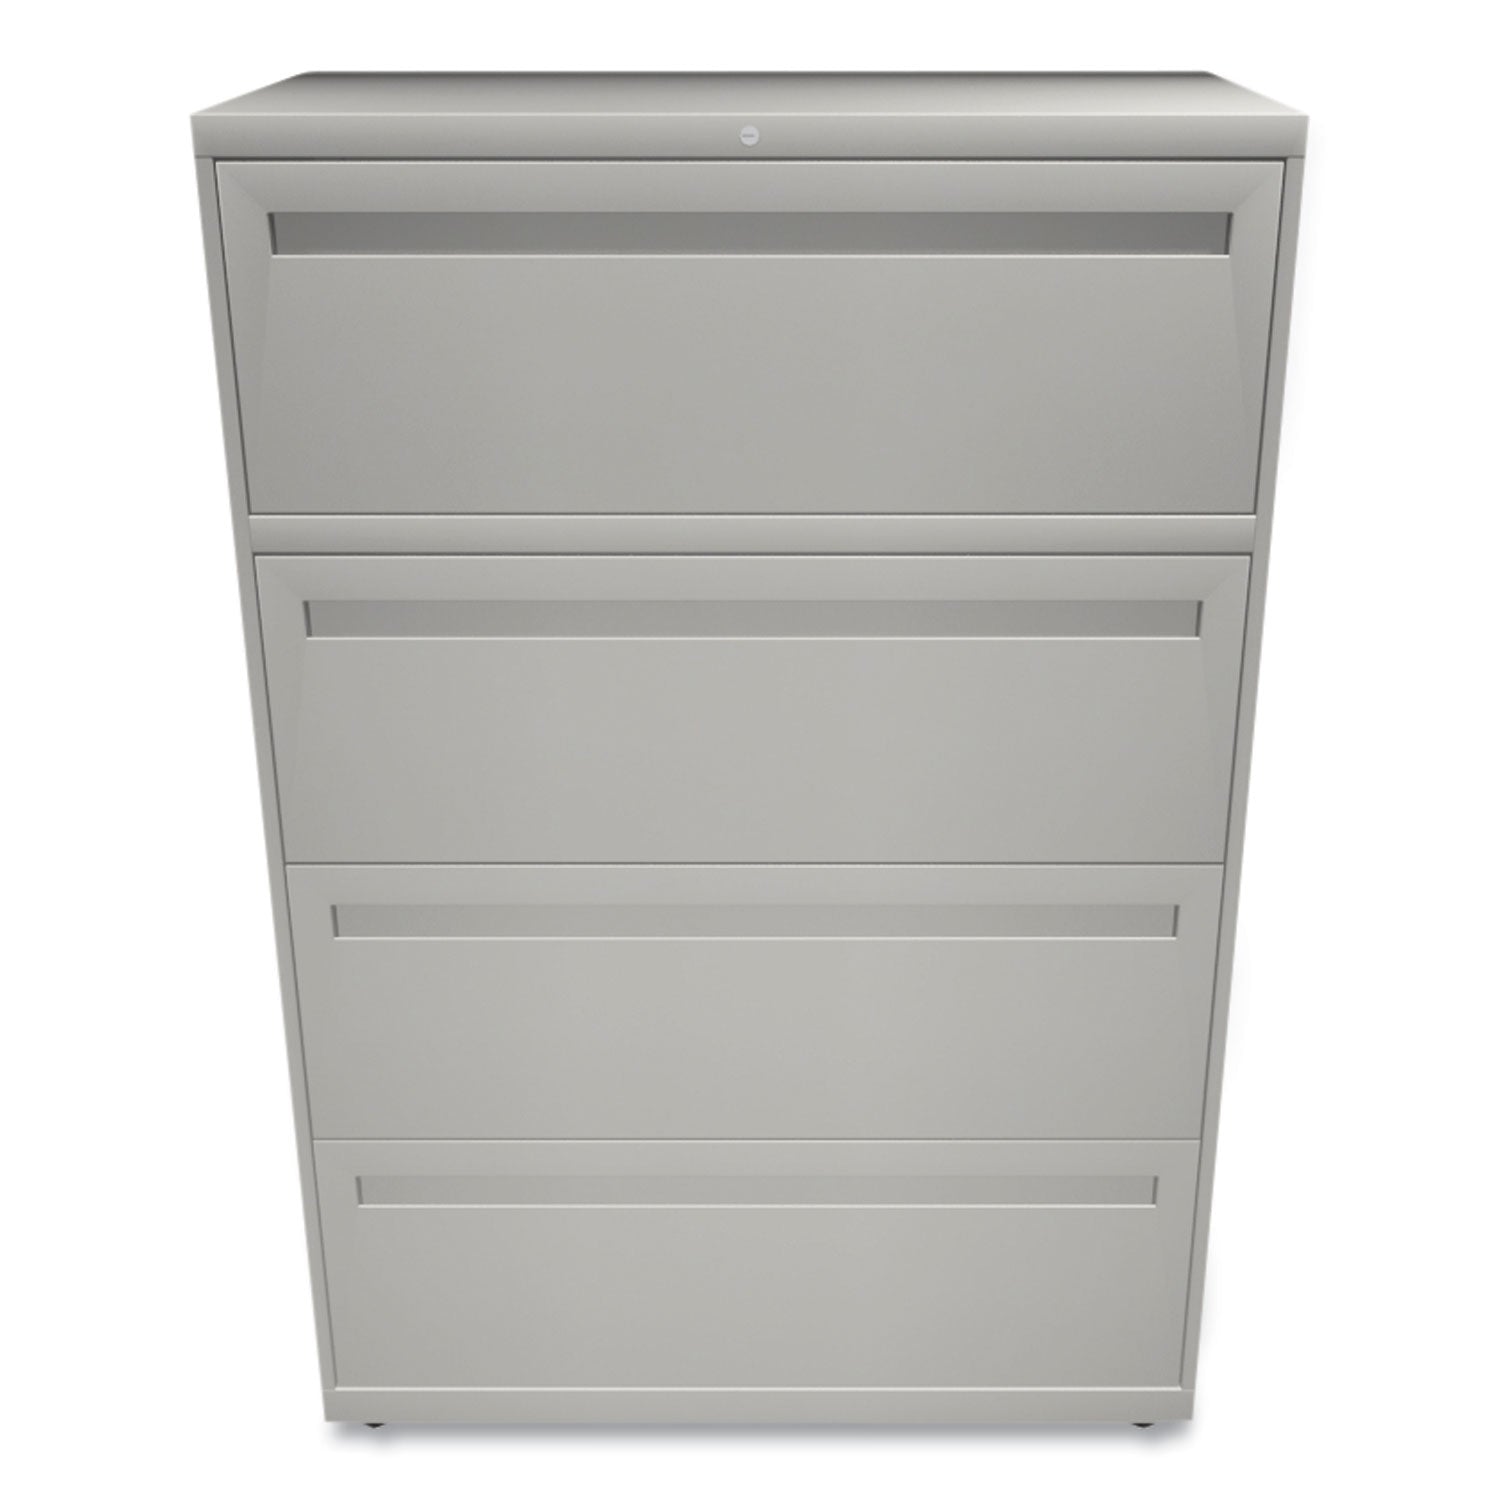 Brigade 700 Series Lateral File, 4 Legal/Letter-Size File Drawers, Light Gray, 36" x 18" x 52.5 - 